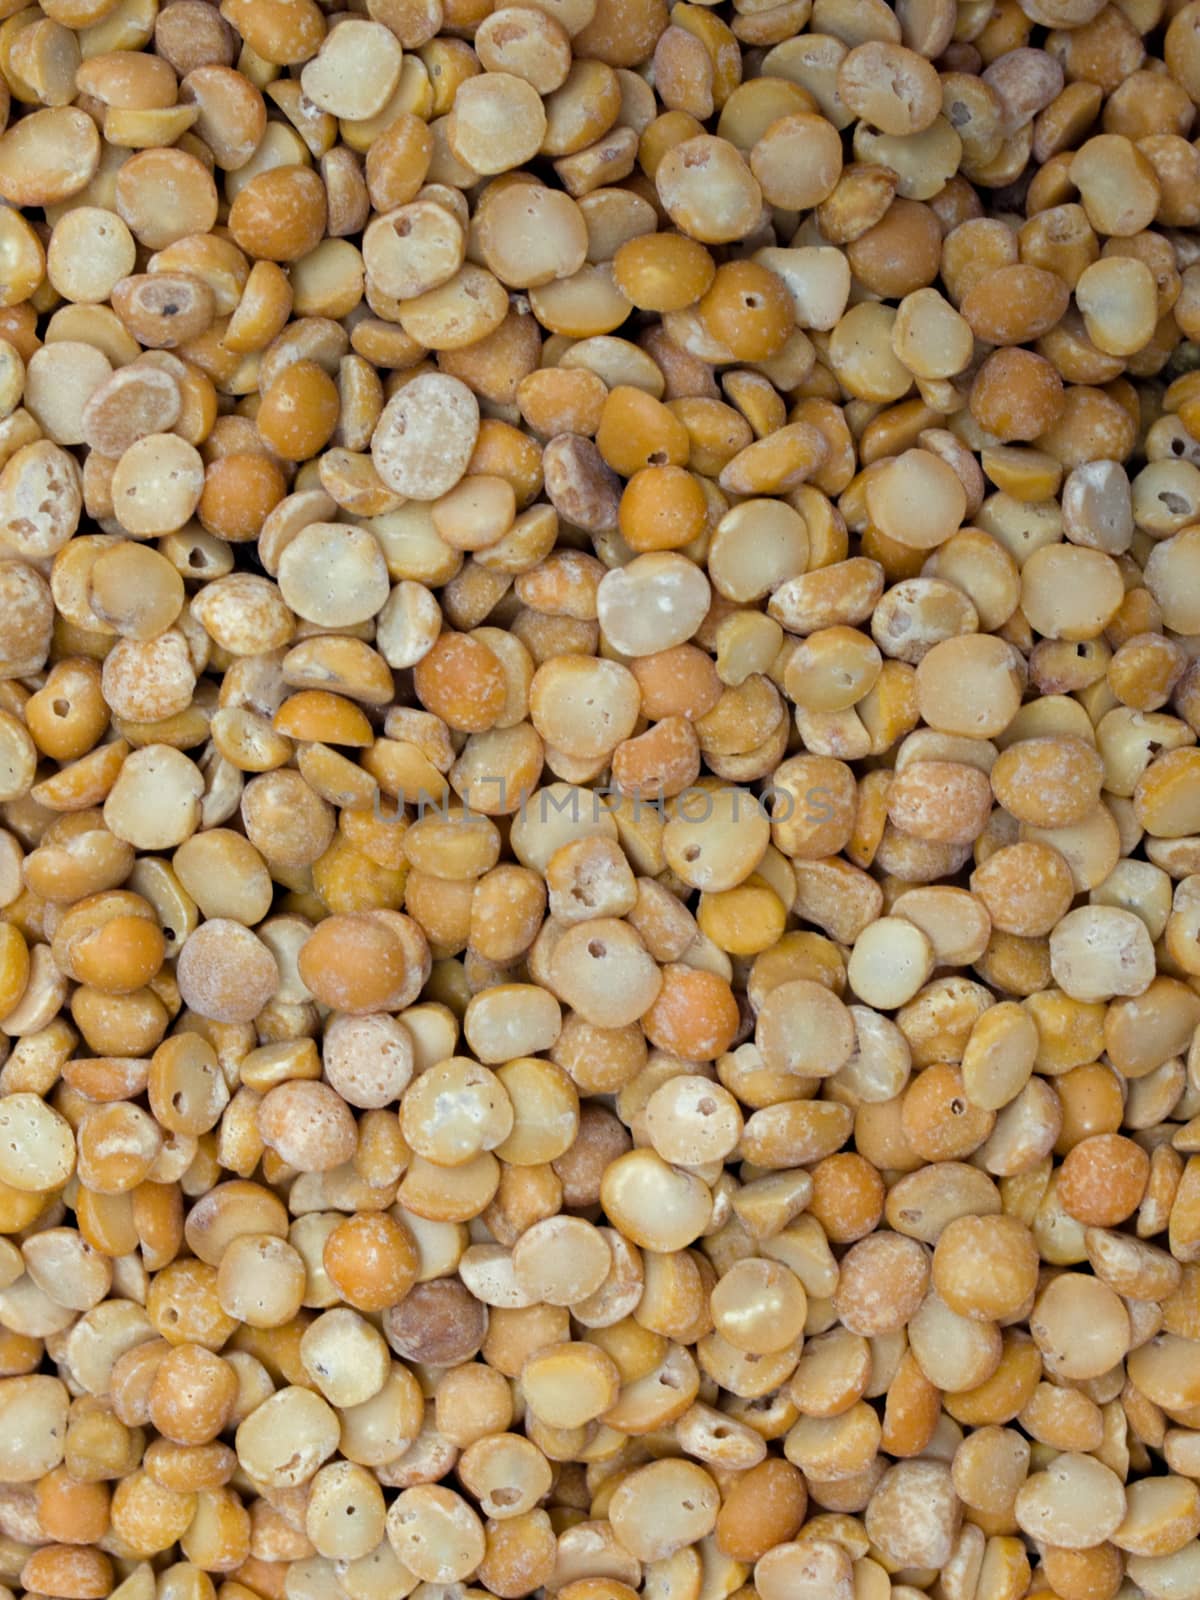 CHICKPEA OR CHICK PEA (CICER ARIETINUM) by PrettyTG